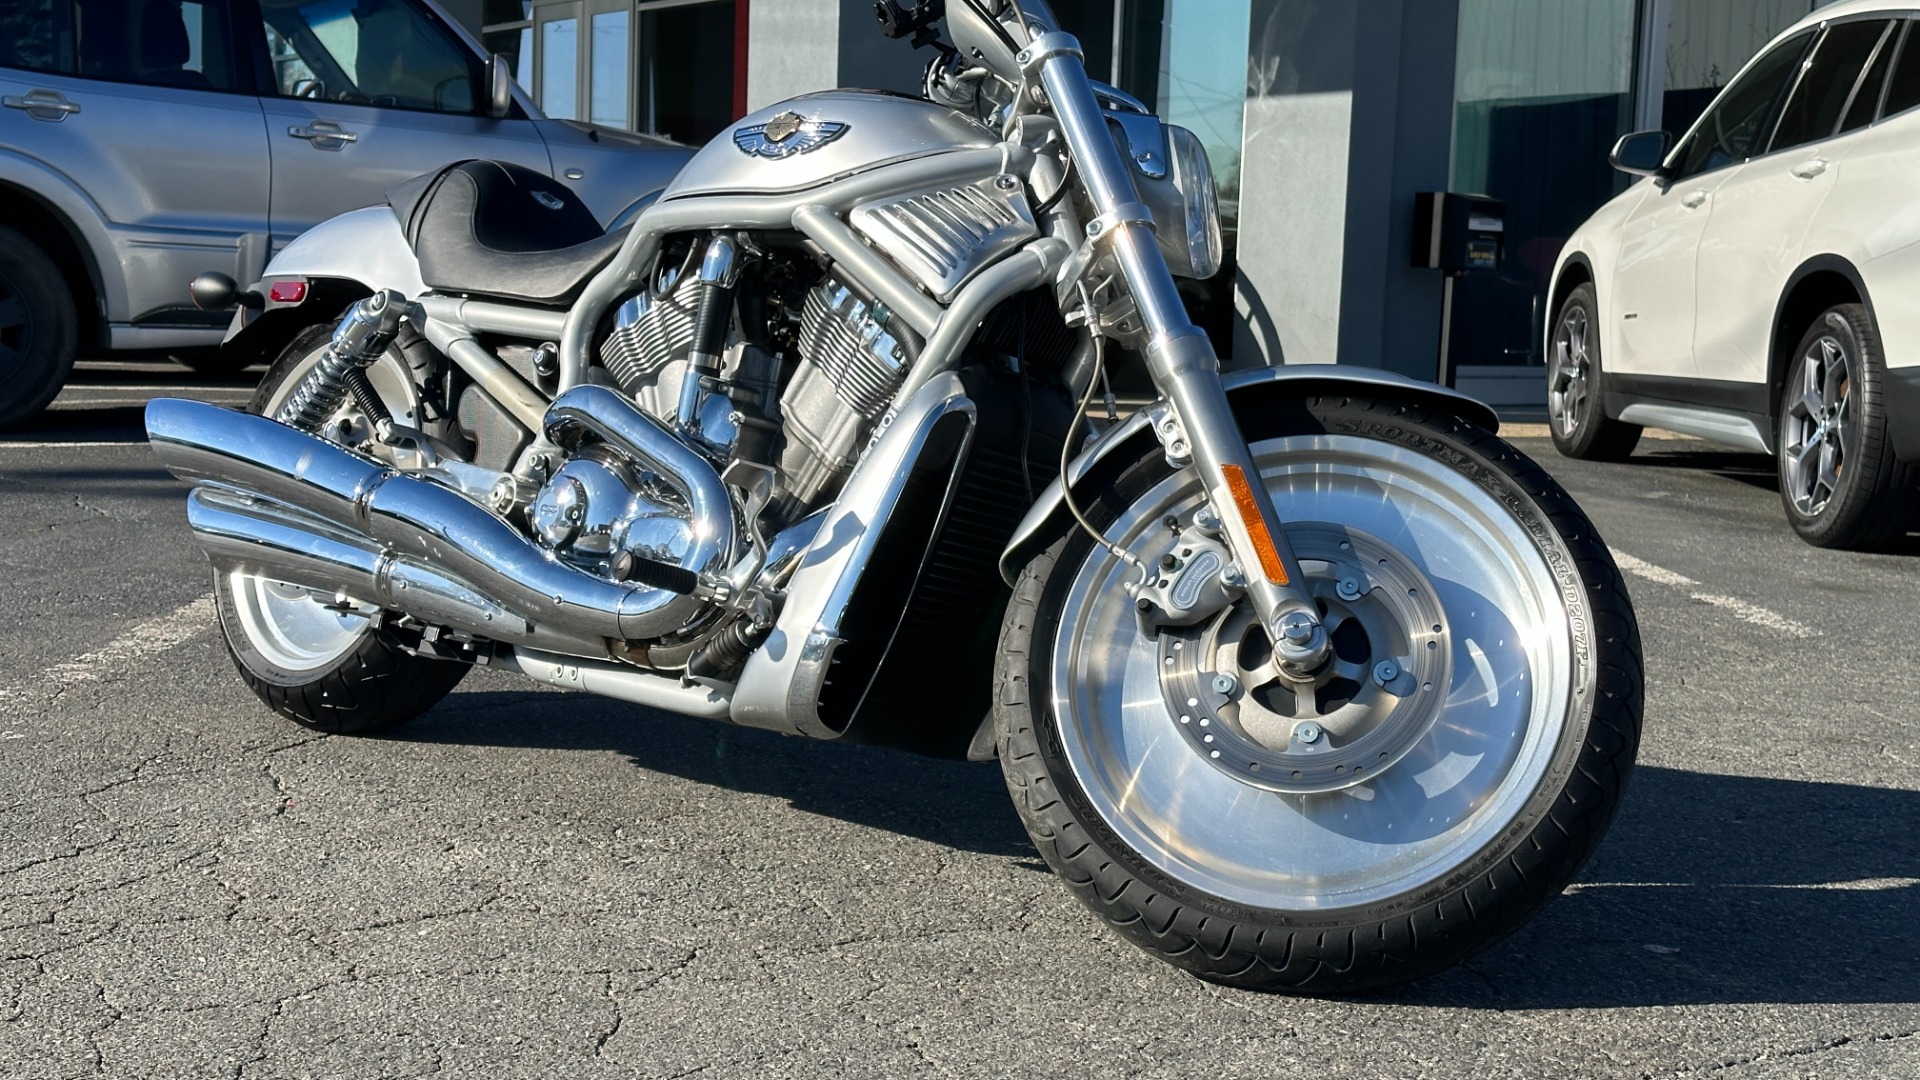 Used 2003 Harley Davidson V Rod ANNIVERSARY EDITION / 1130CC ENGINE / BREMBO BRAKES / VORTEX AIR SCOOPS for sale $7,695 at Formula Imports in Charlotte NC 28227 4